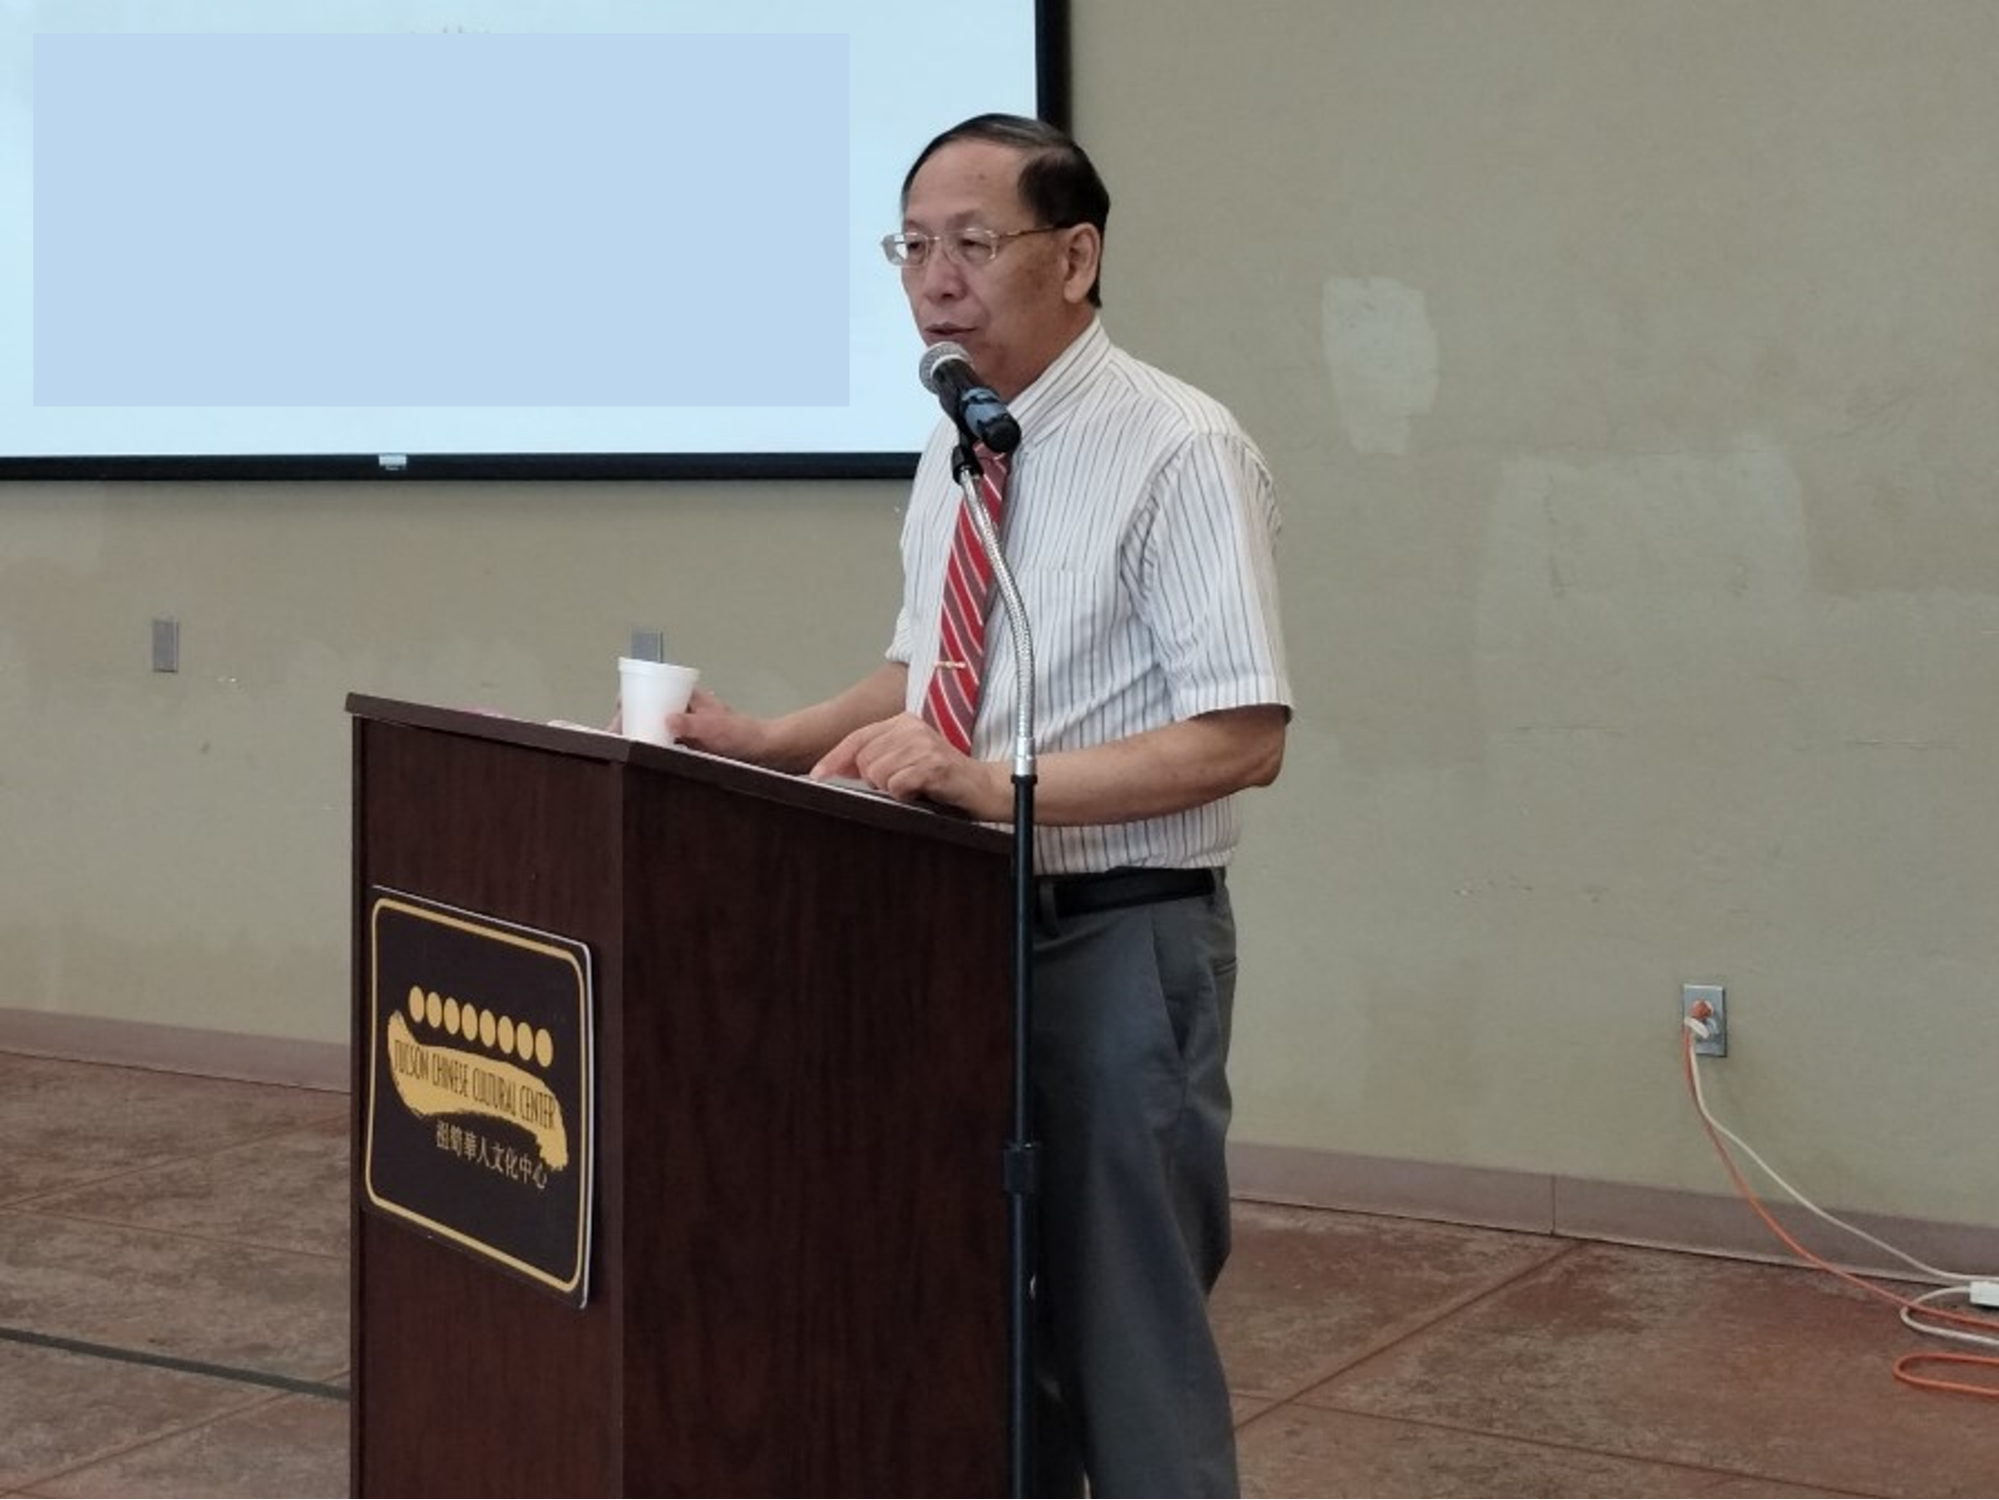 Dr. Howard Eng conducted the meeting.